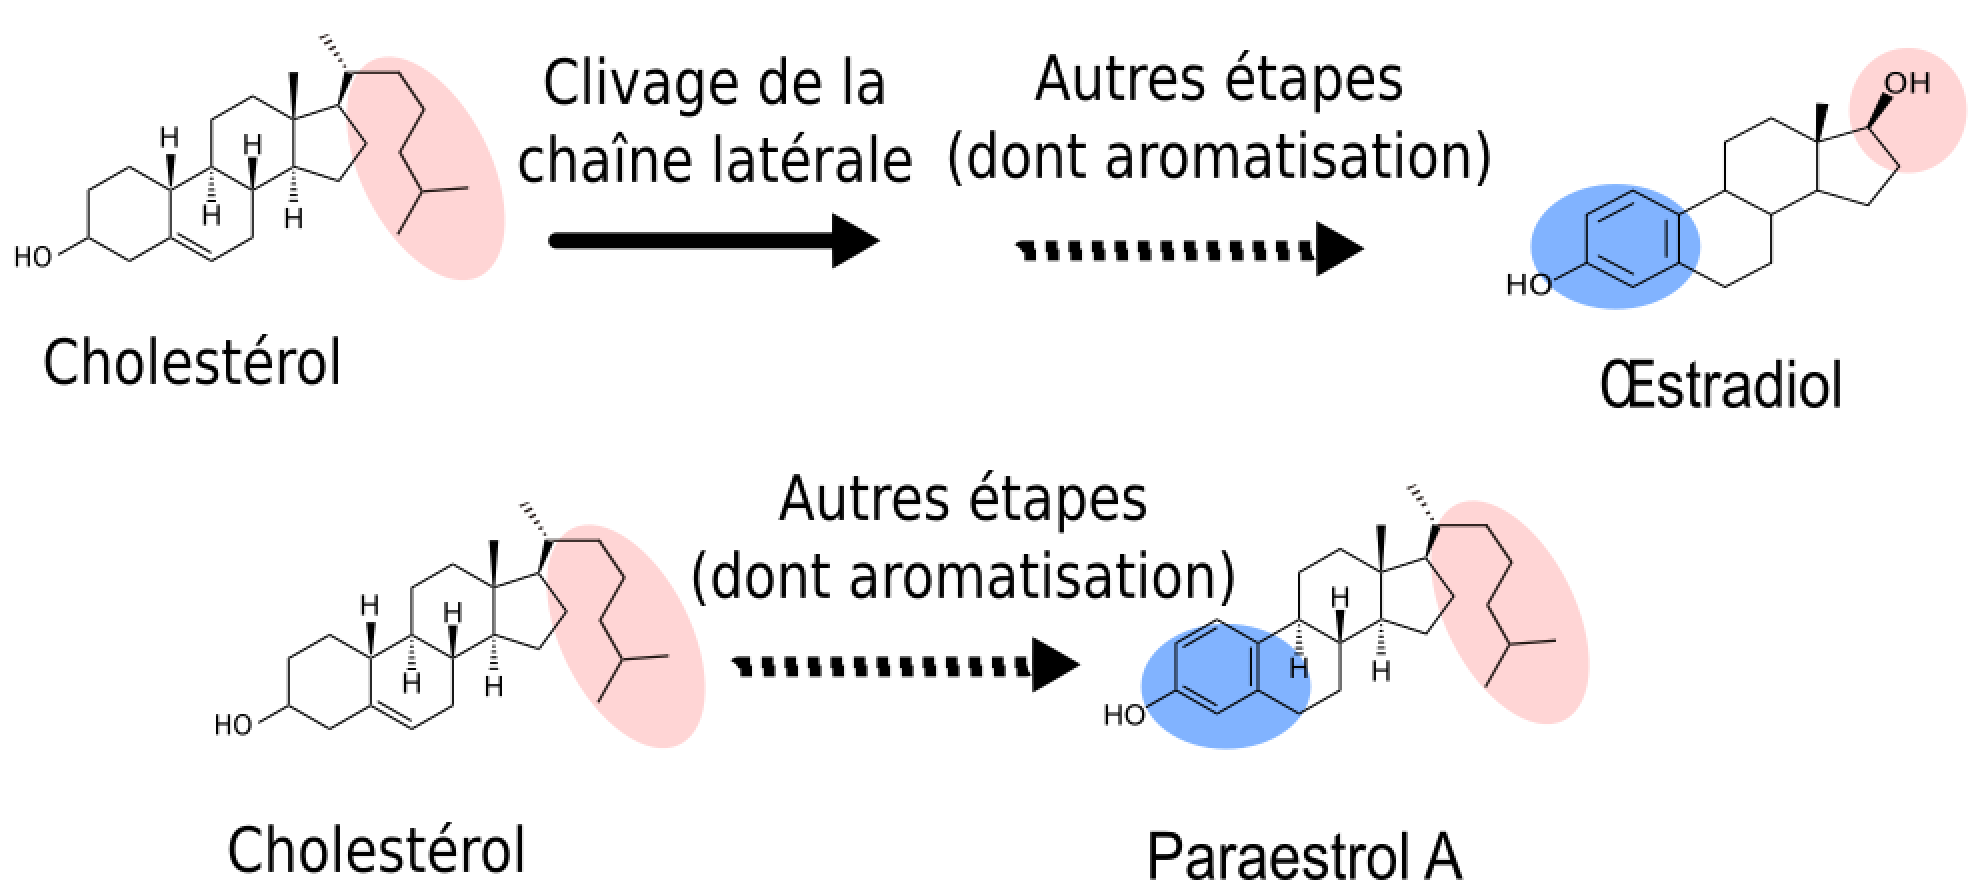 acheter steroide anabolisant france: What A Mistake!